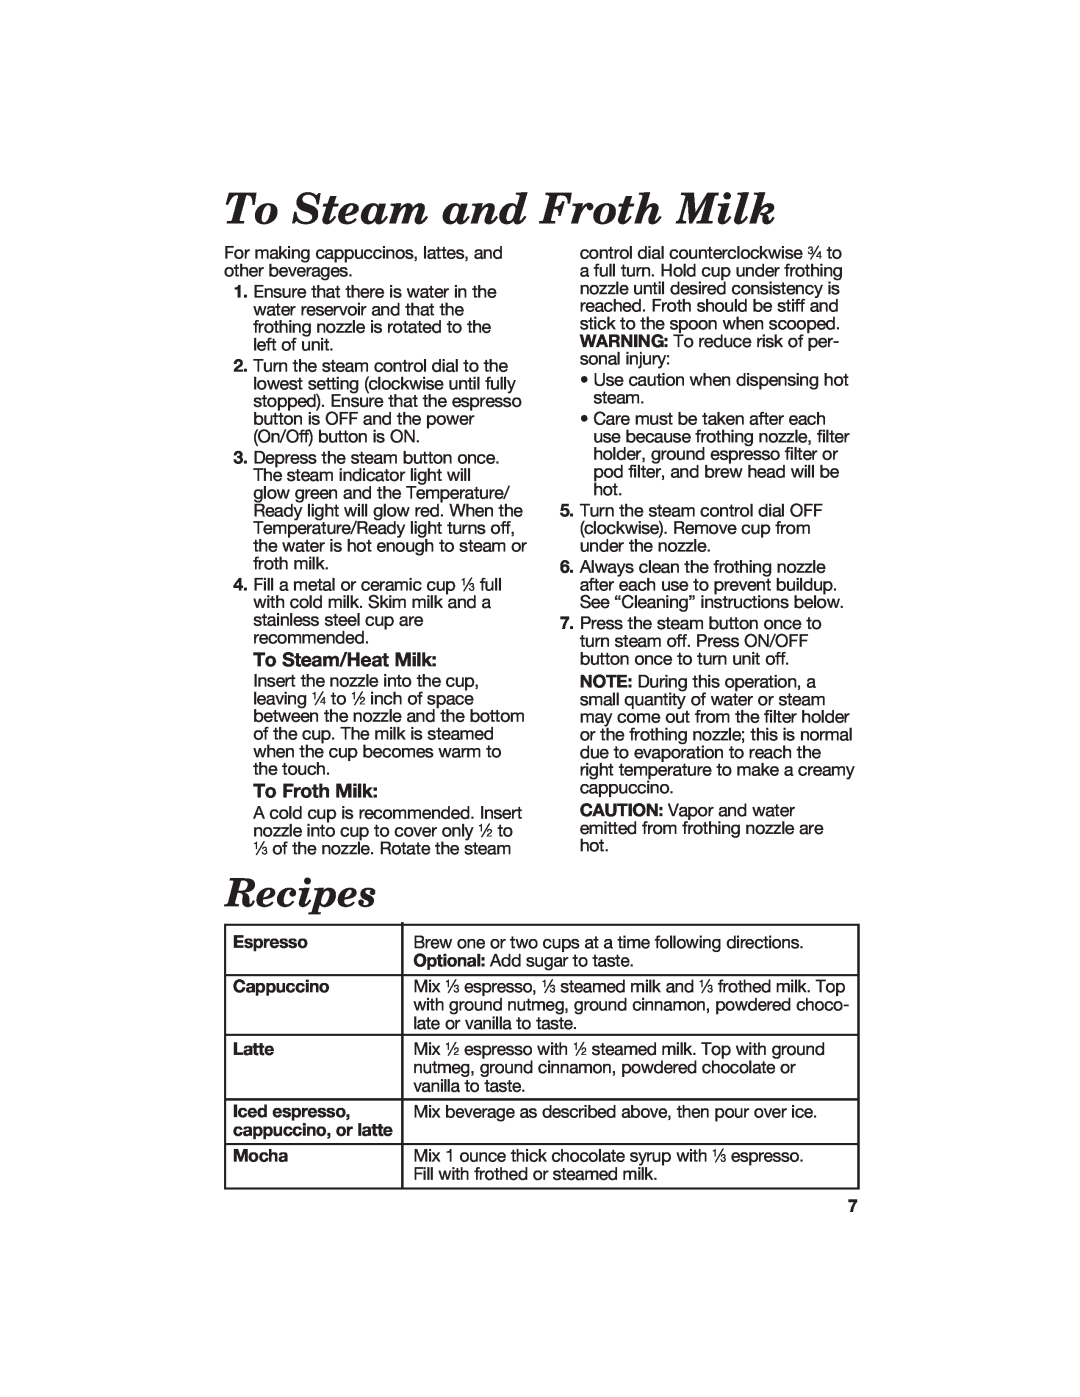 Hamilton Beach Cappuccino Plus specifications To Steam and Froth Milk, Recipes, To Steam/Heat Milk, To Froth Milk 